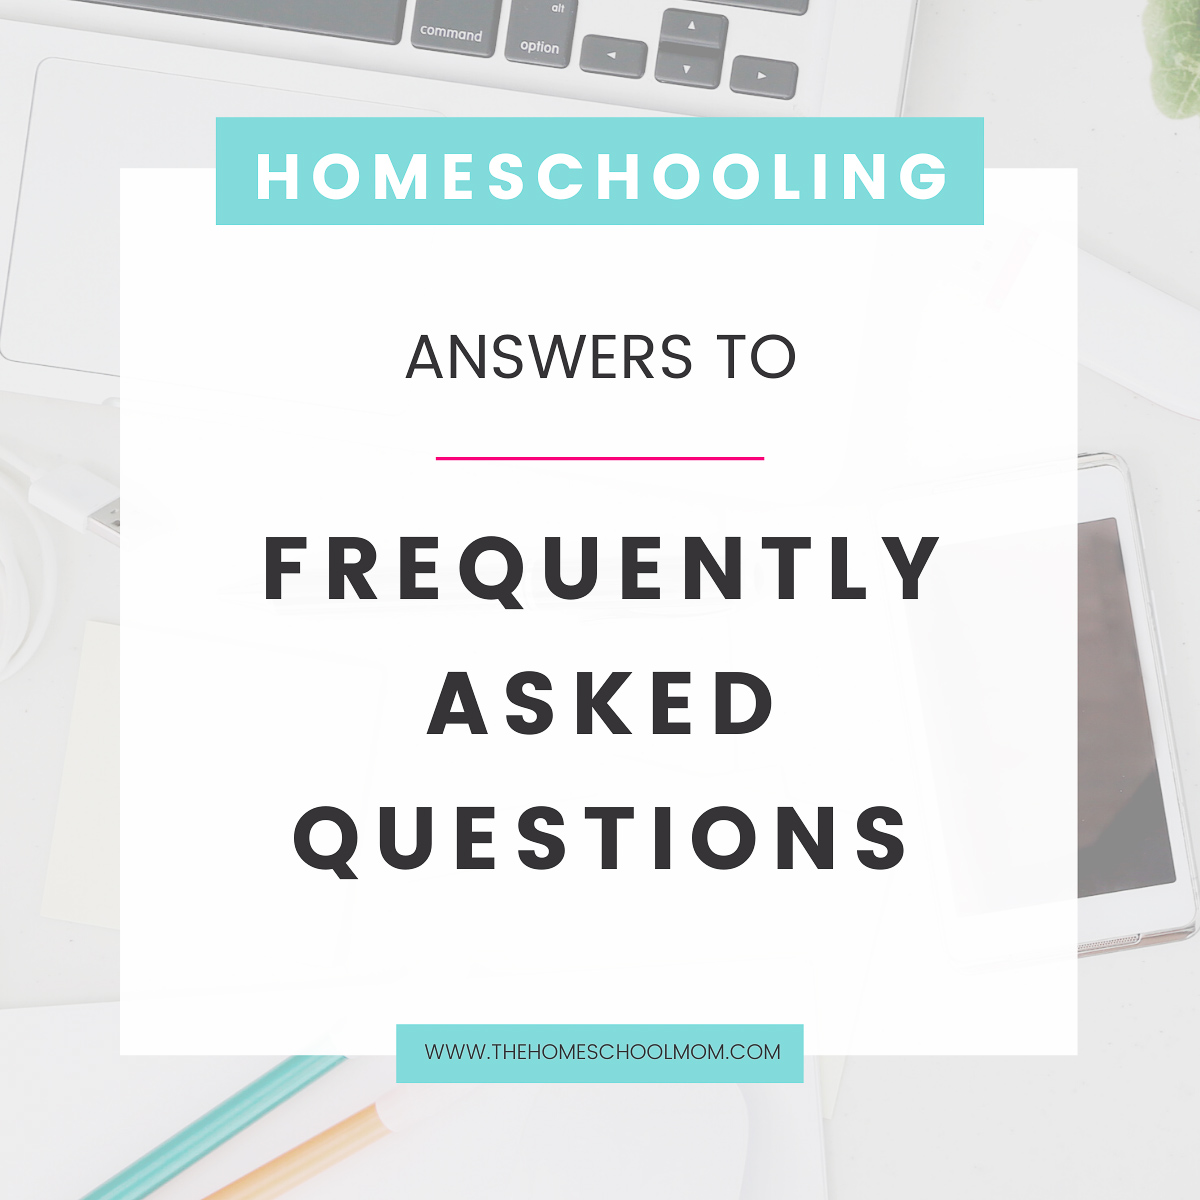 Homeschooling - answers to frequently asked questions